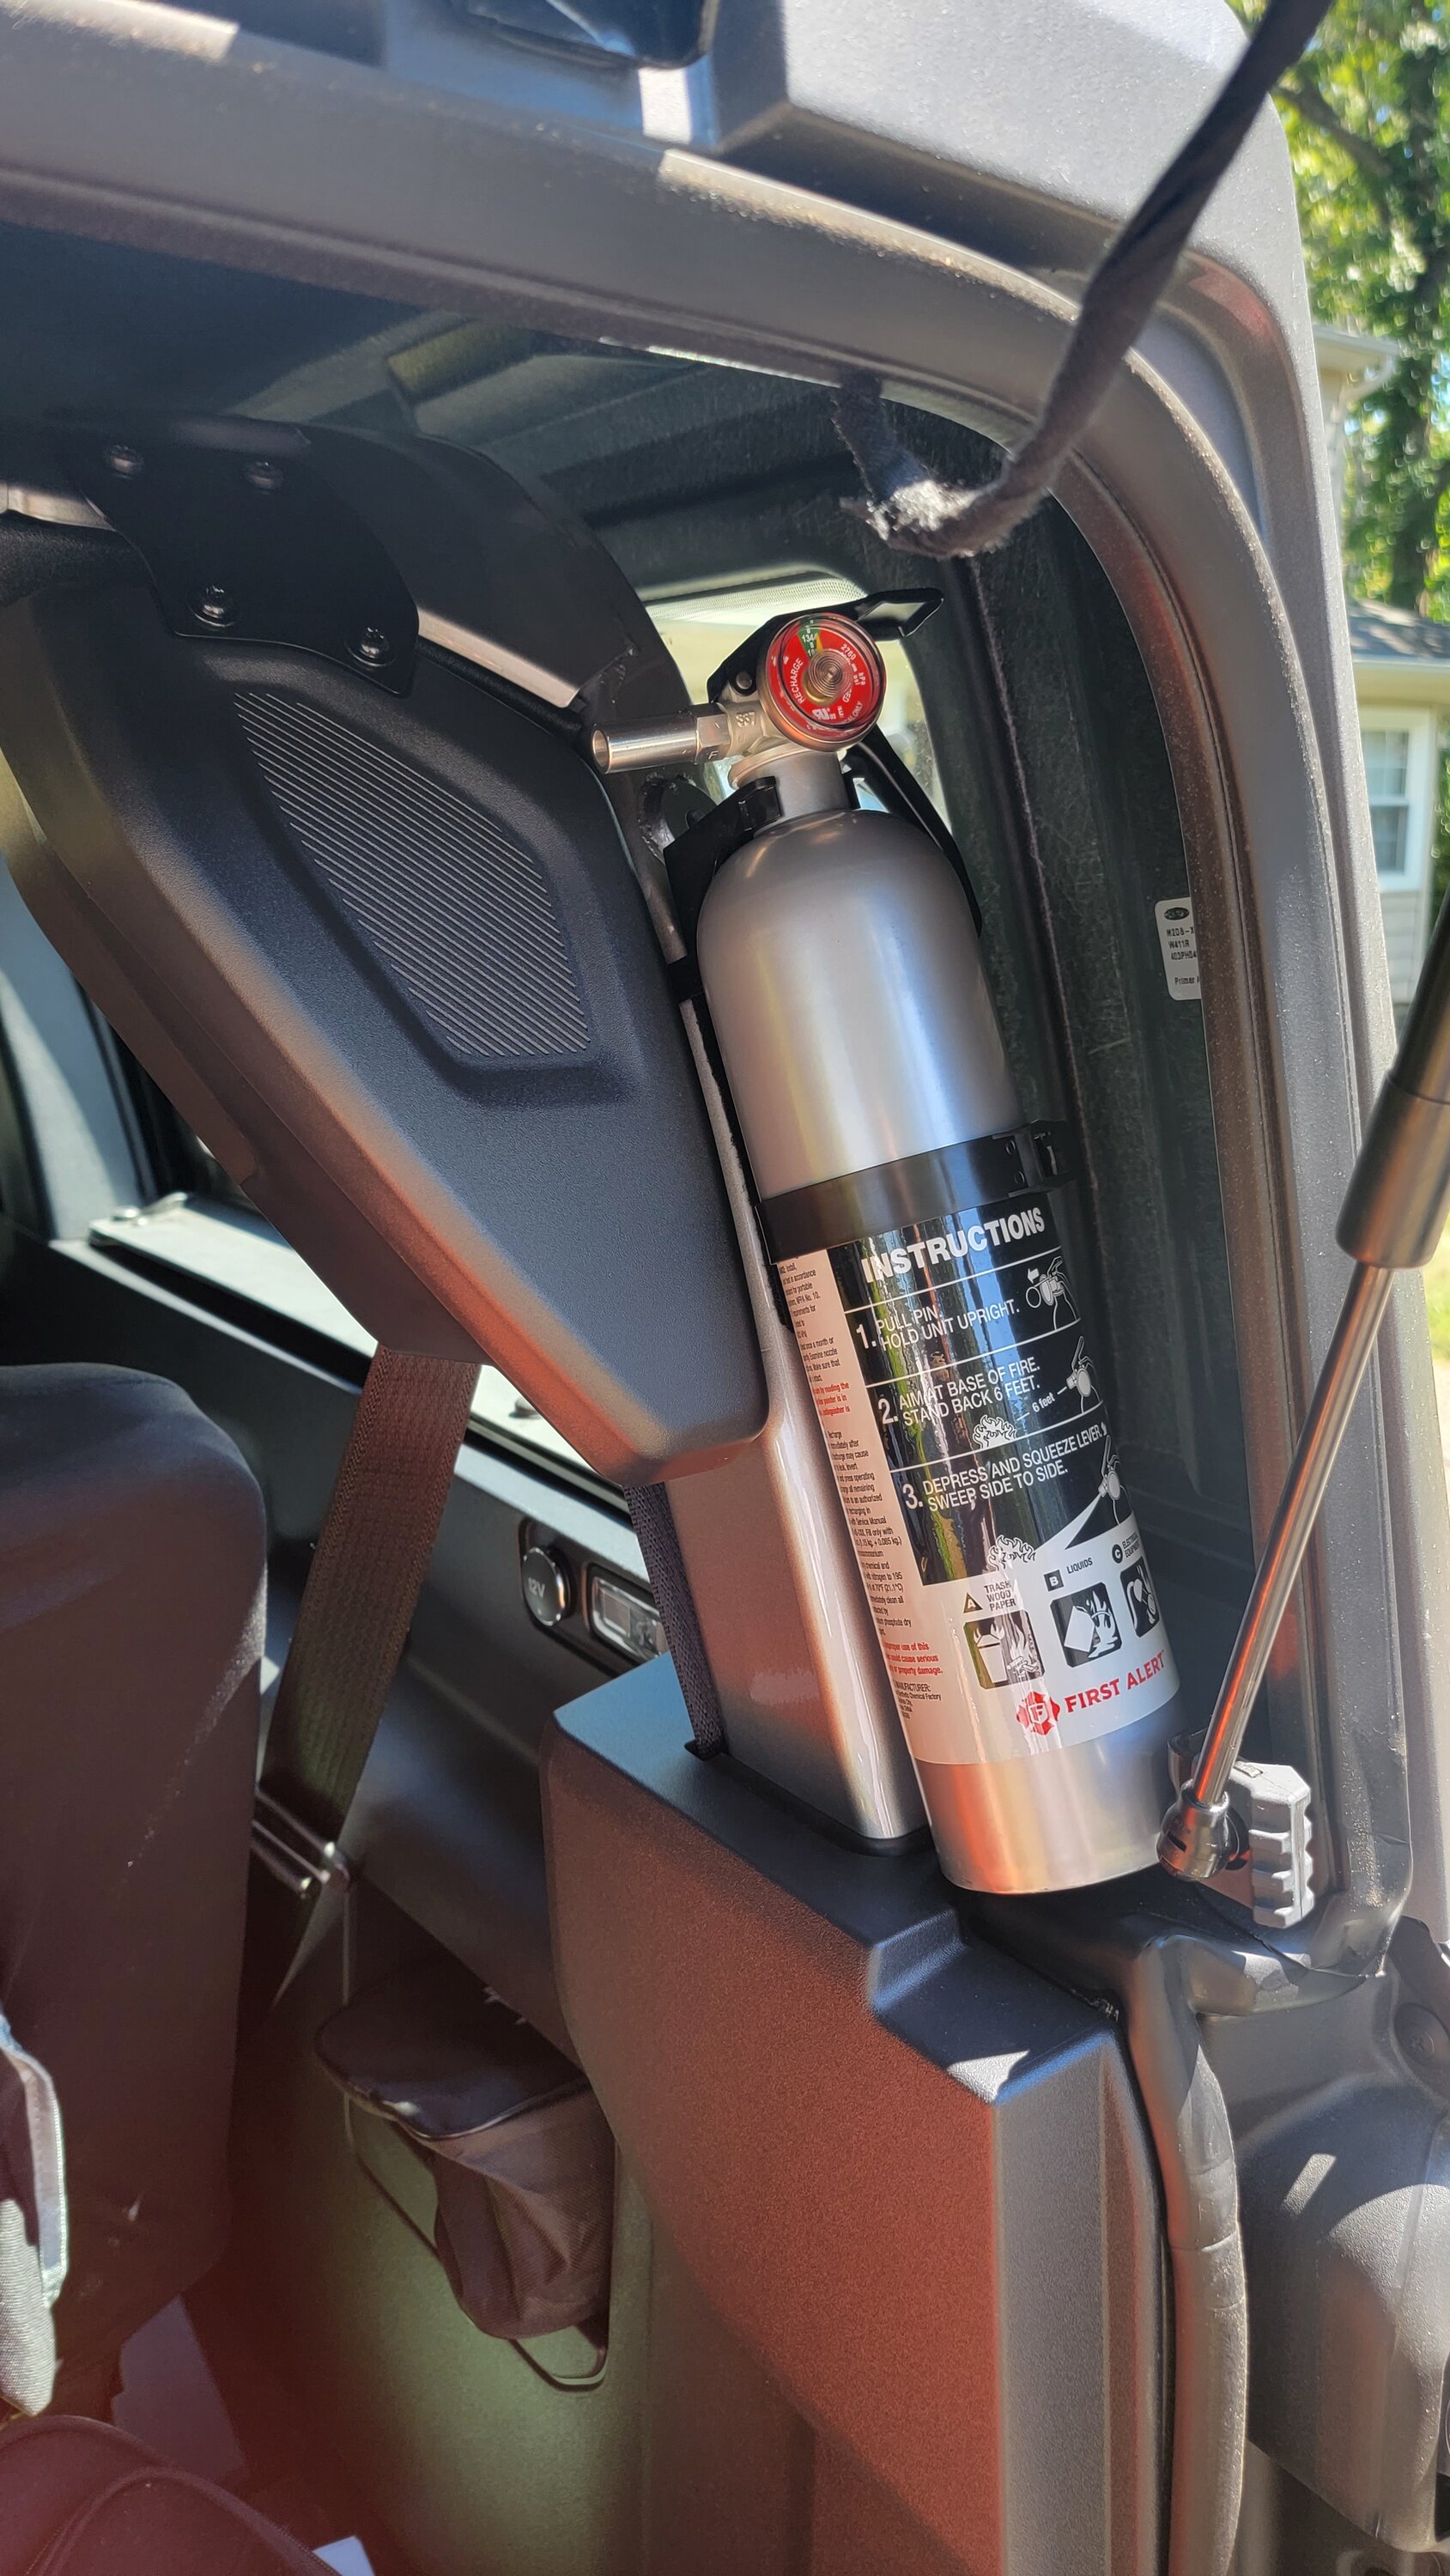 Ford Bronco Fire Extinguisher Mounting in the Bronco - Show Your Installs 4D242DB5-8038-435D-9EE5-687E44C65566